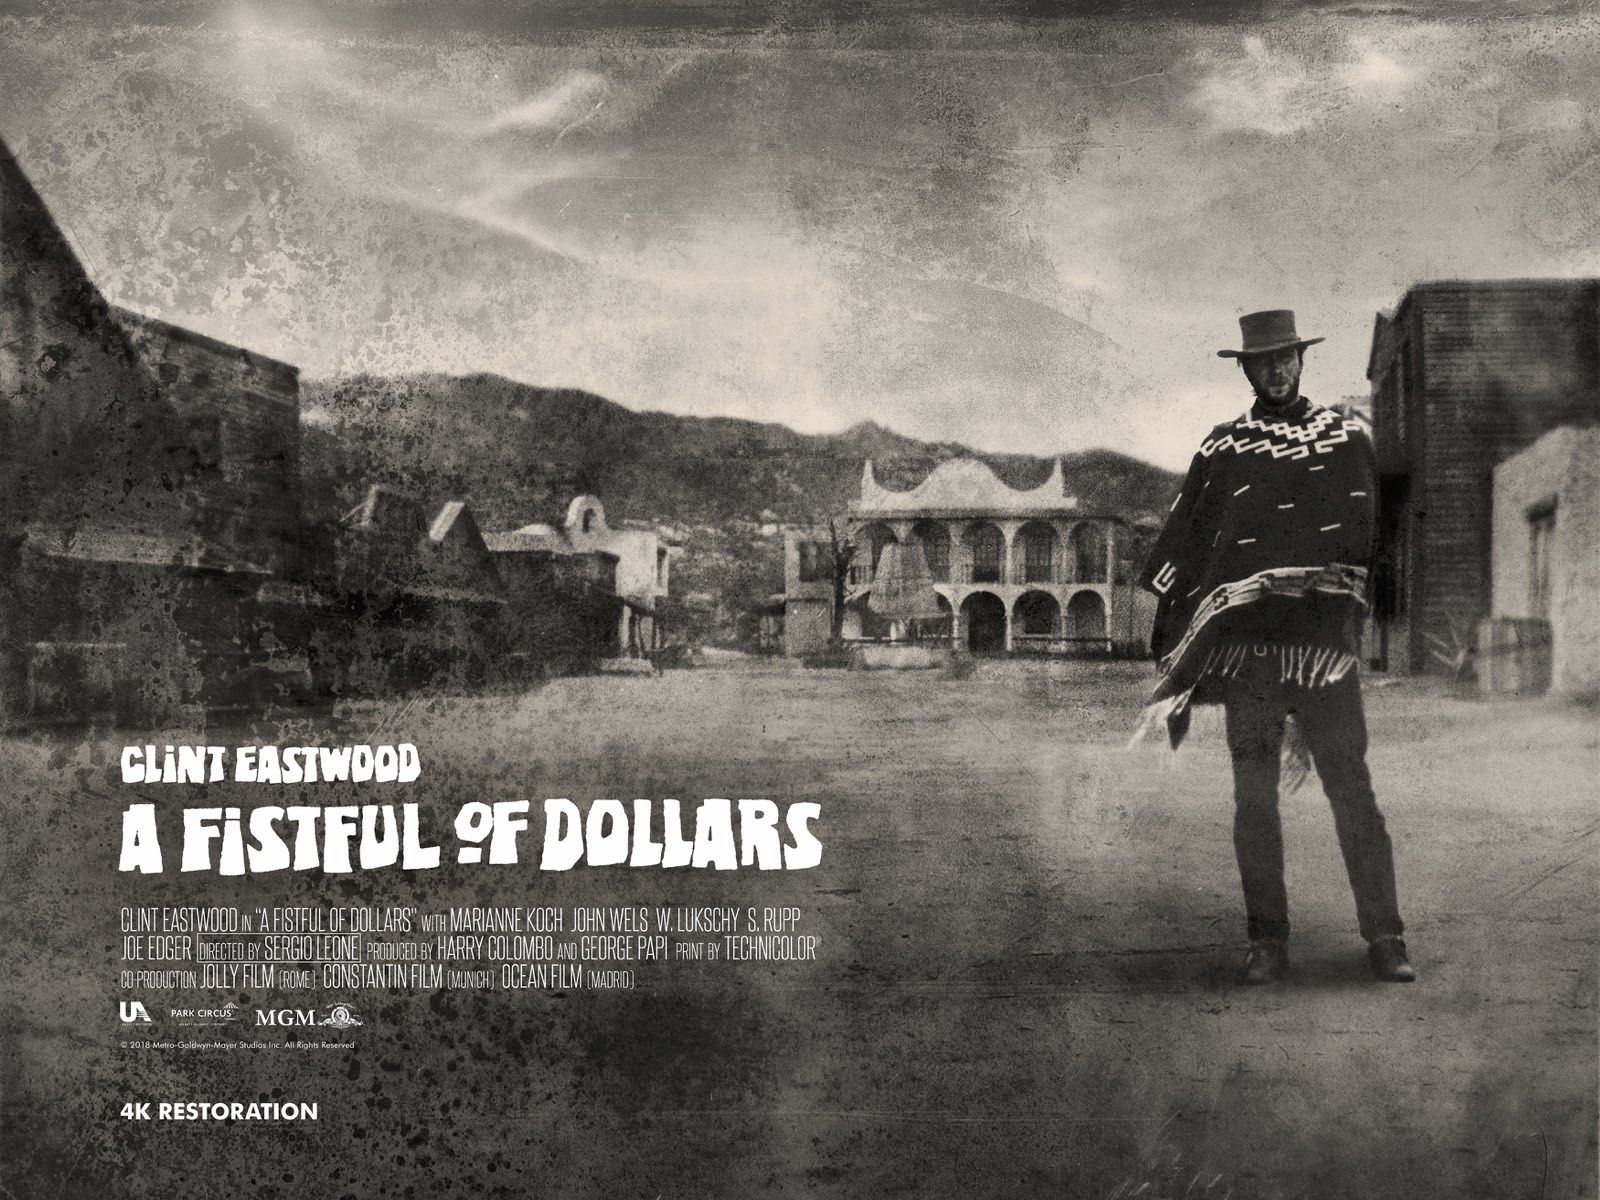 A Fistful Of Dollars Marketing Materials